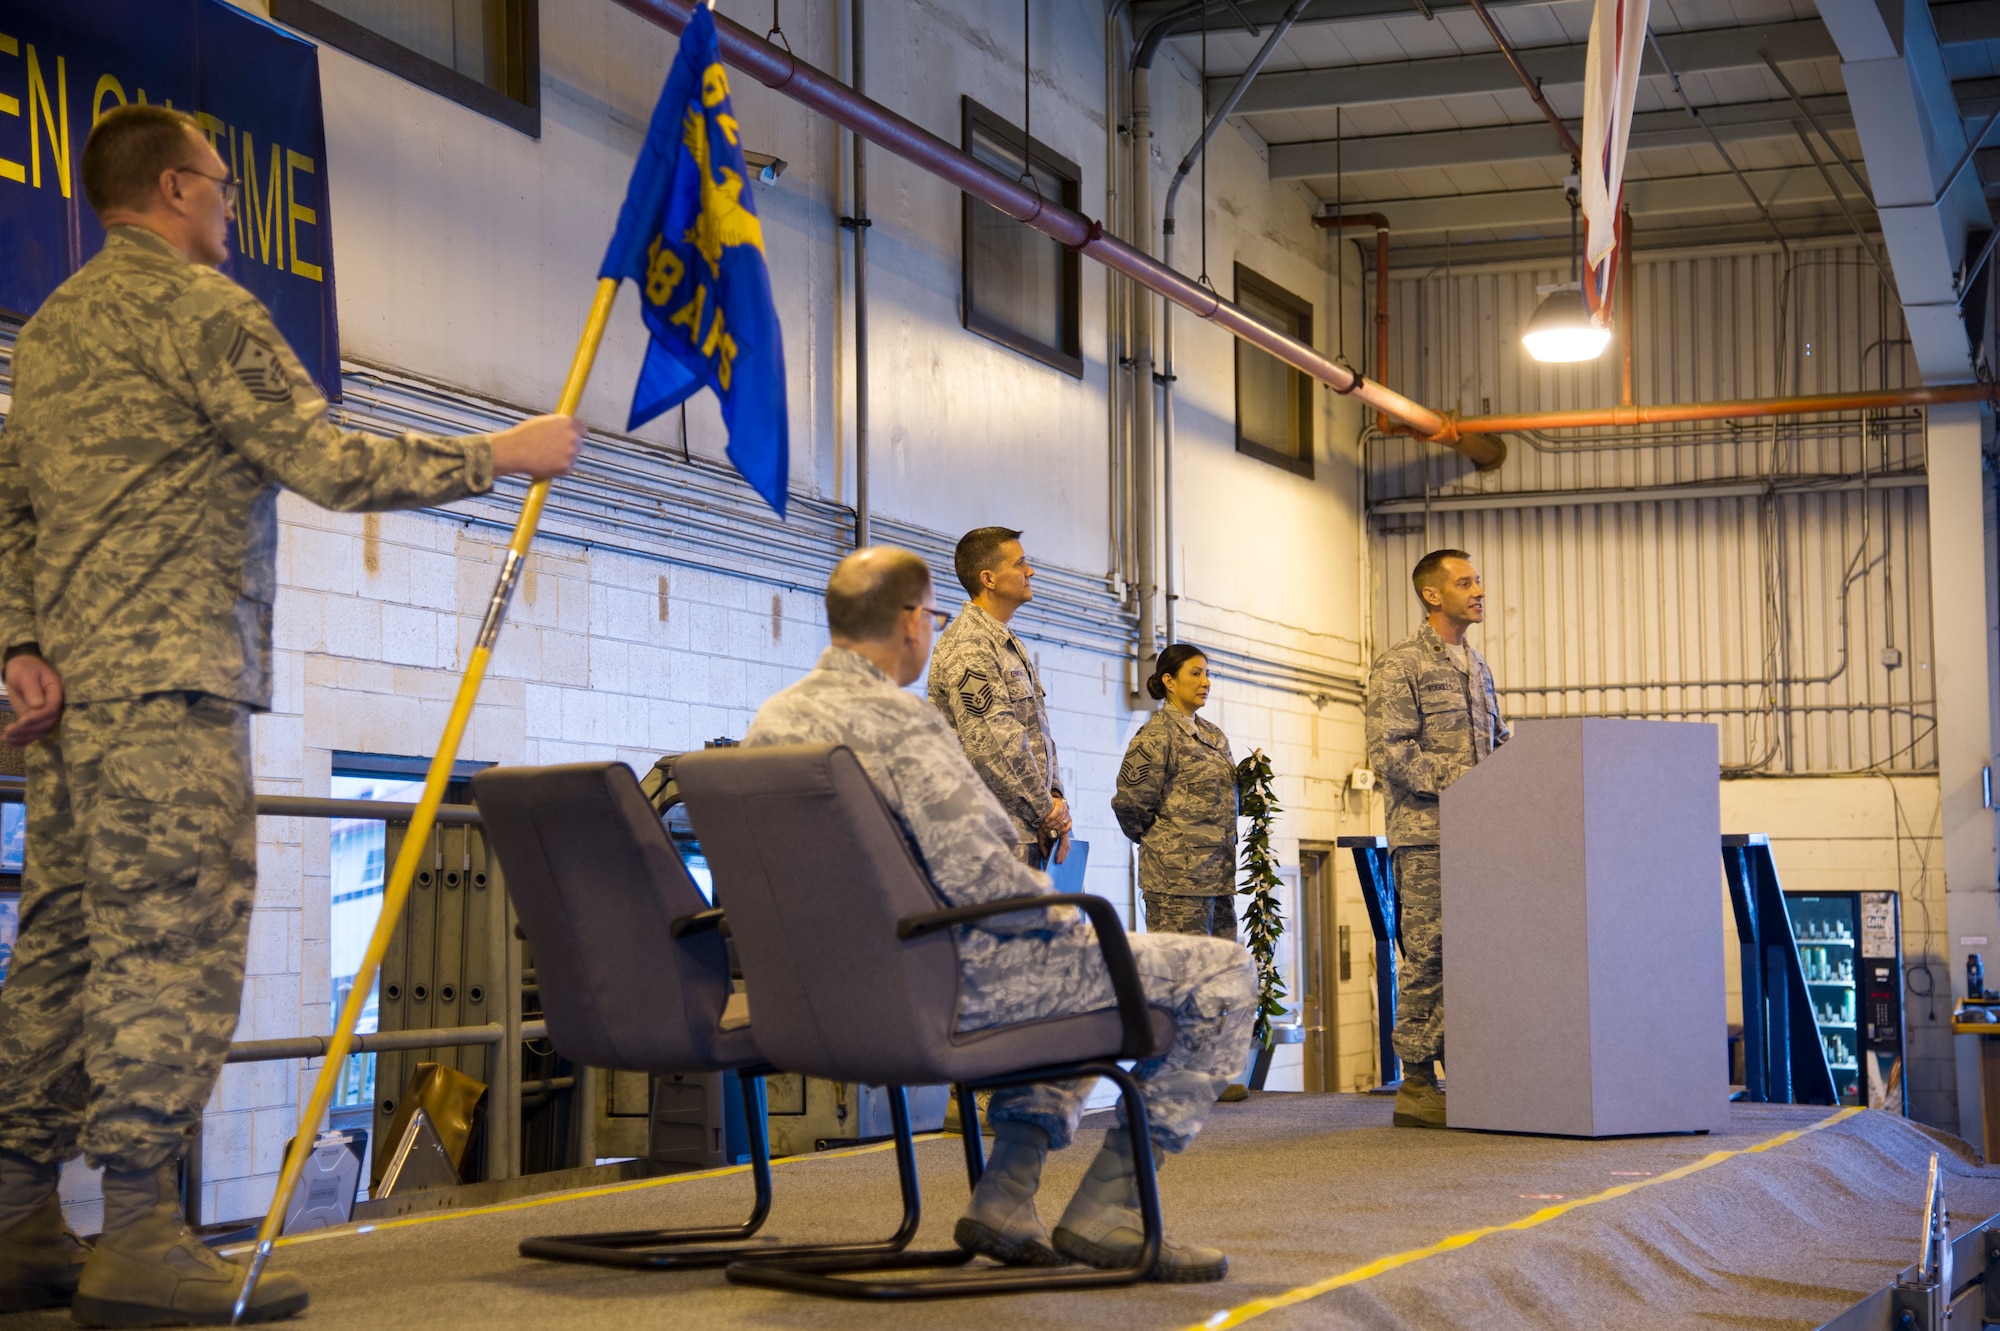 U.S. Air Force Maj. Kenneth Ruggles Jr. addresses guest and members of the 48th Aerial Port Squadron during an assumption of command ceremony at Joint Base Pearl Harbor-Hickam, Hawaii, April 7, 2018, where Ruggles became the 48th APS commander.